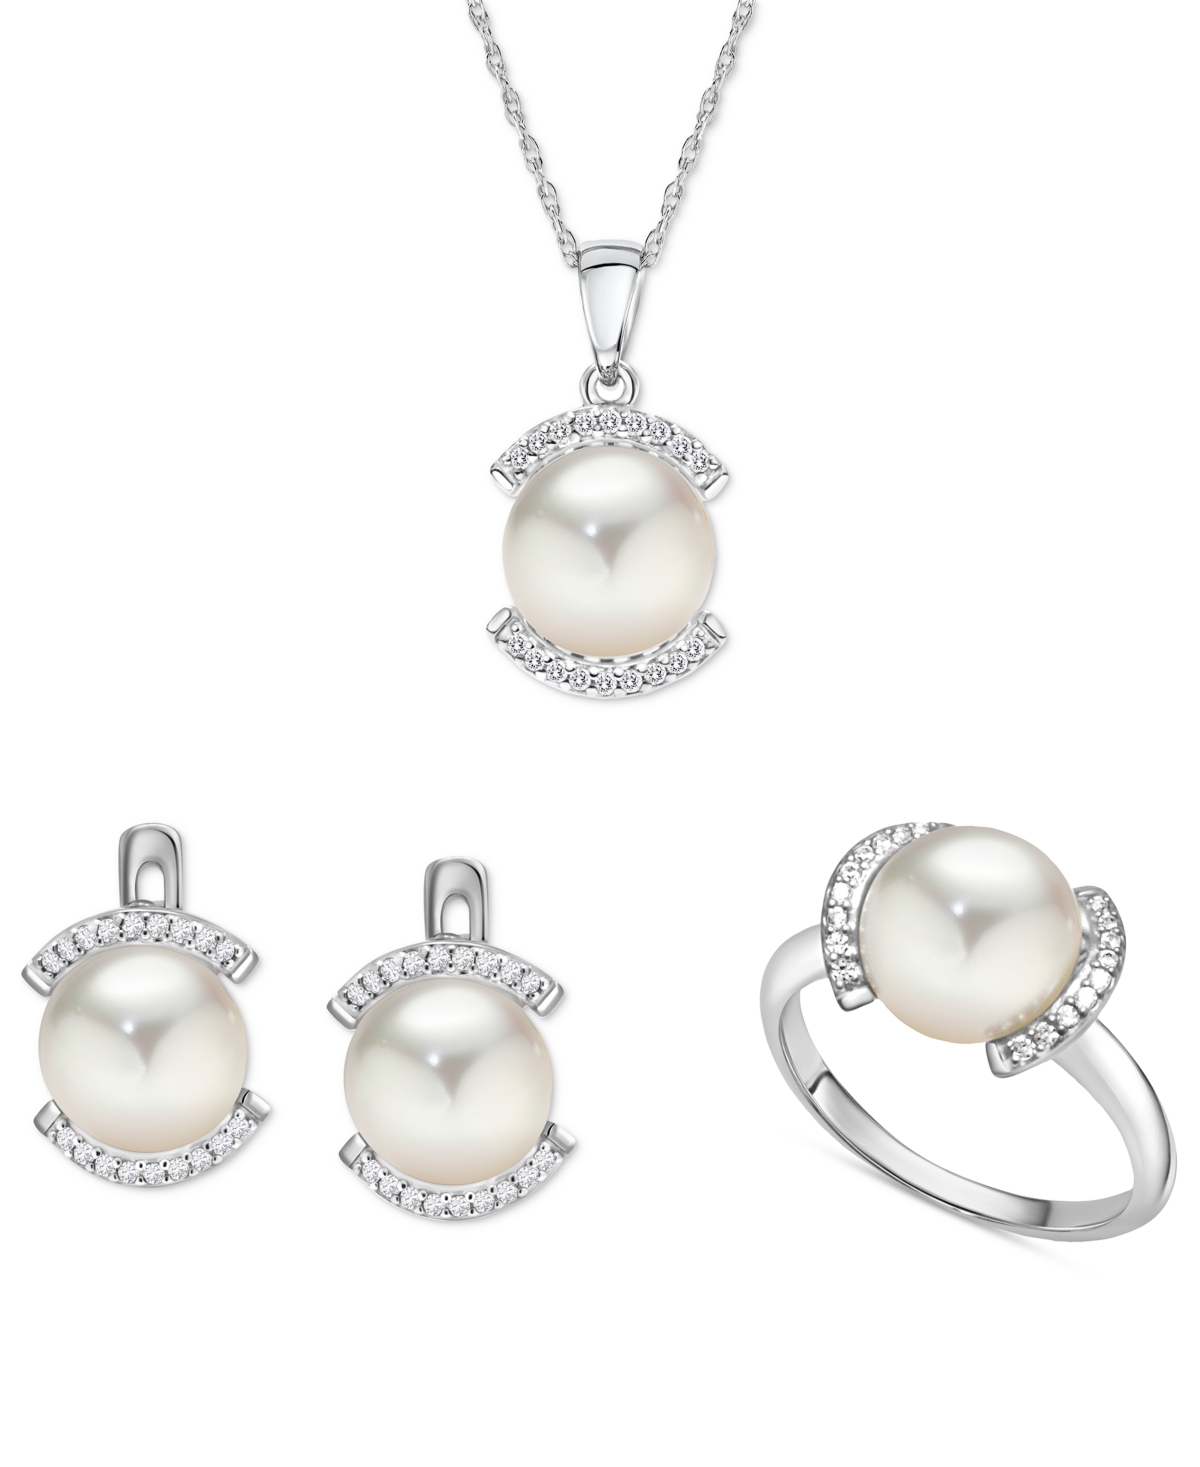 3-Pc. Set Cultured Freshwater Pearl (9mm) & White Zircon (1/2 ct. t.w.) Pendant Necklace, Ring, & Matching Stud Earrings in Sterling Silver - White